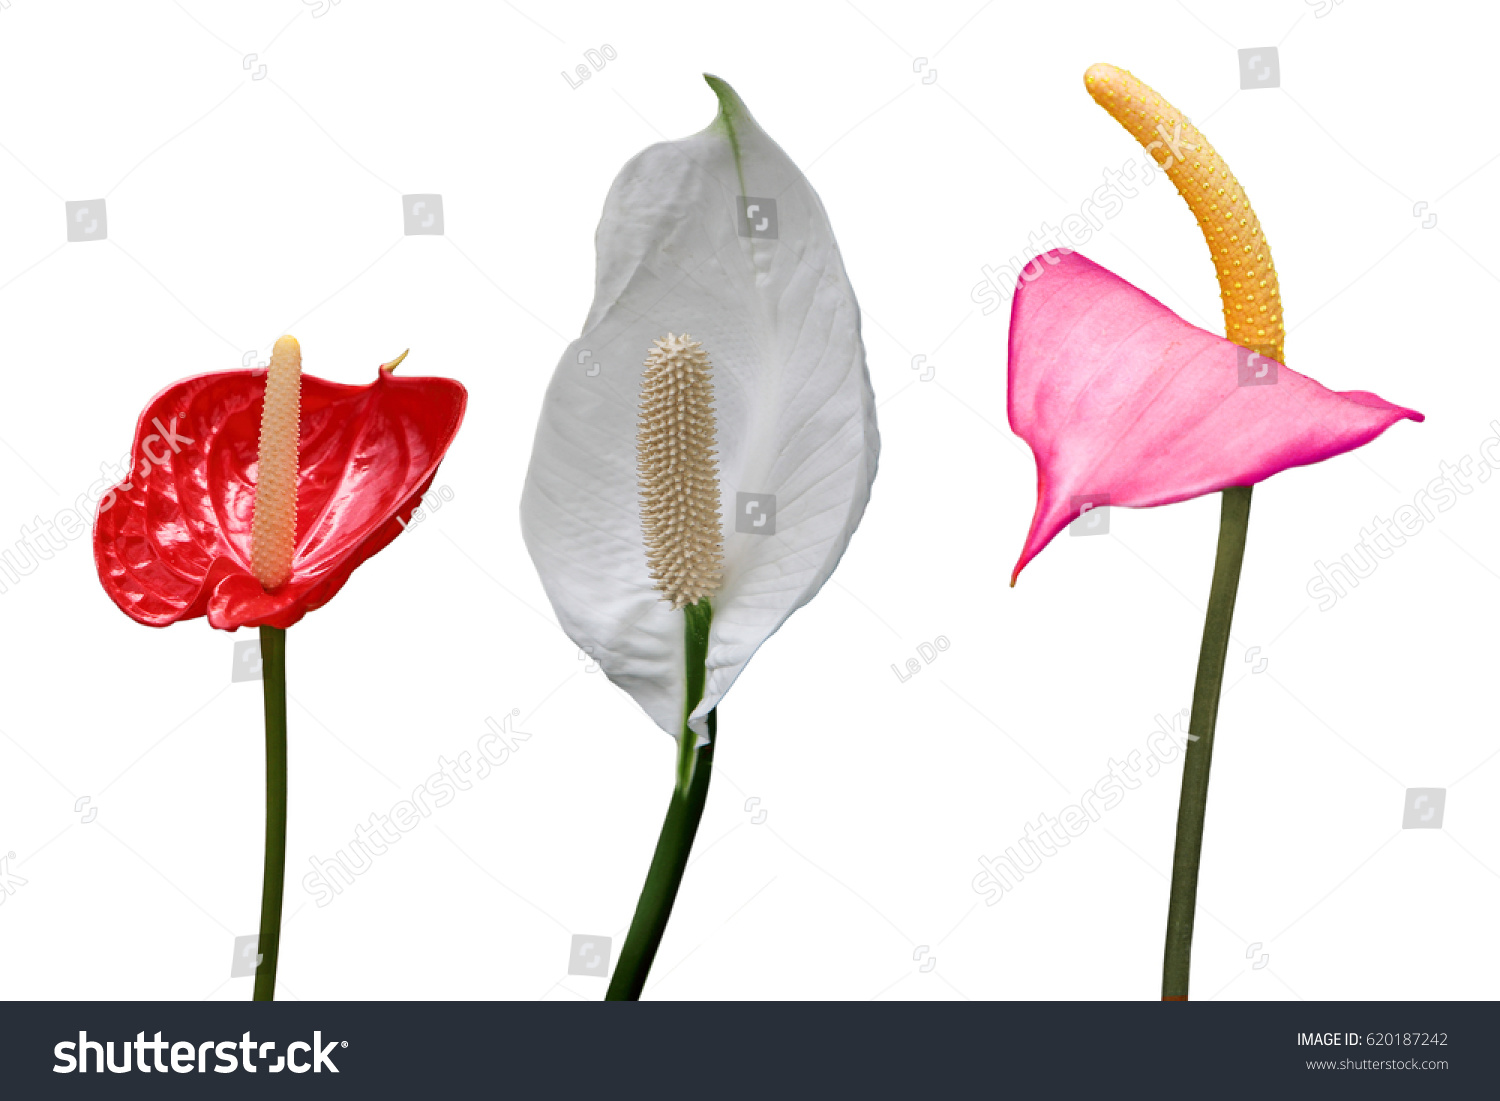 Flamingo Flower Collection isolated on white background #620187242